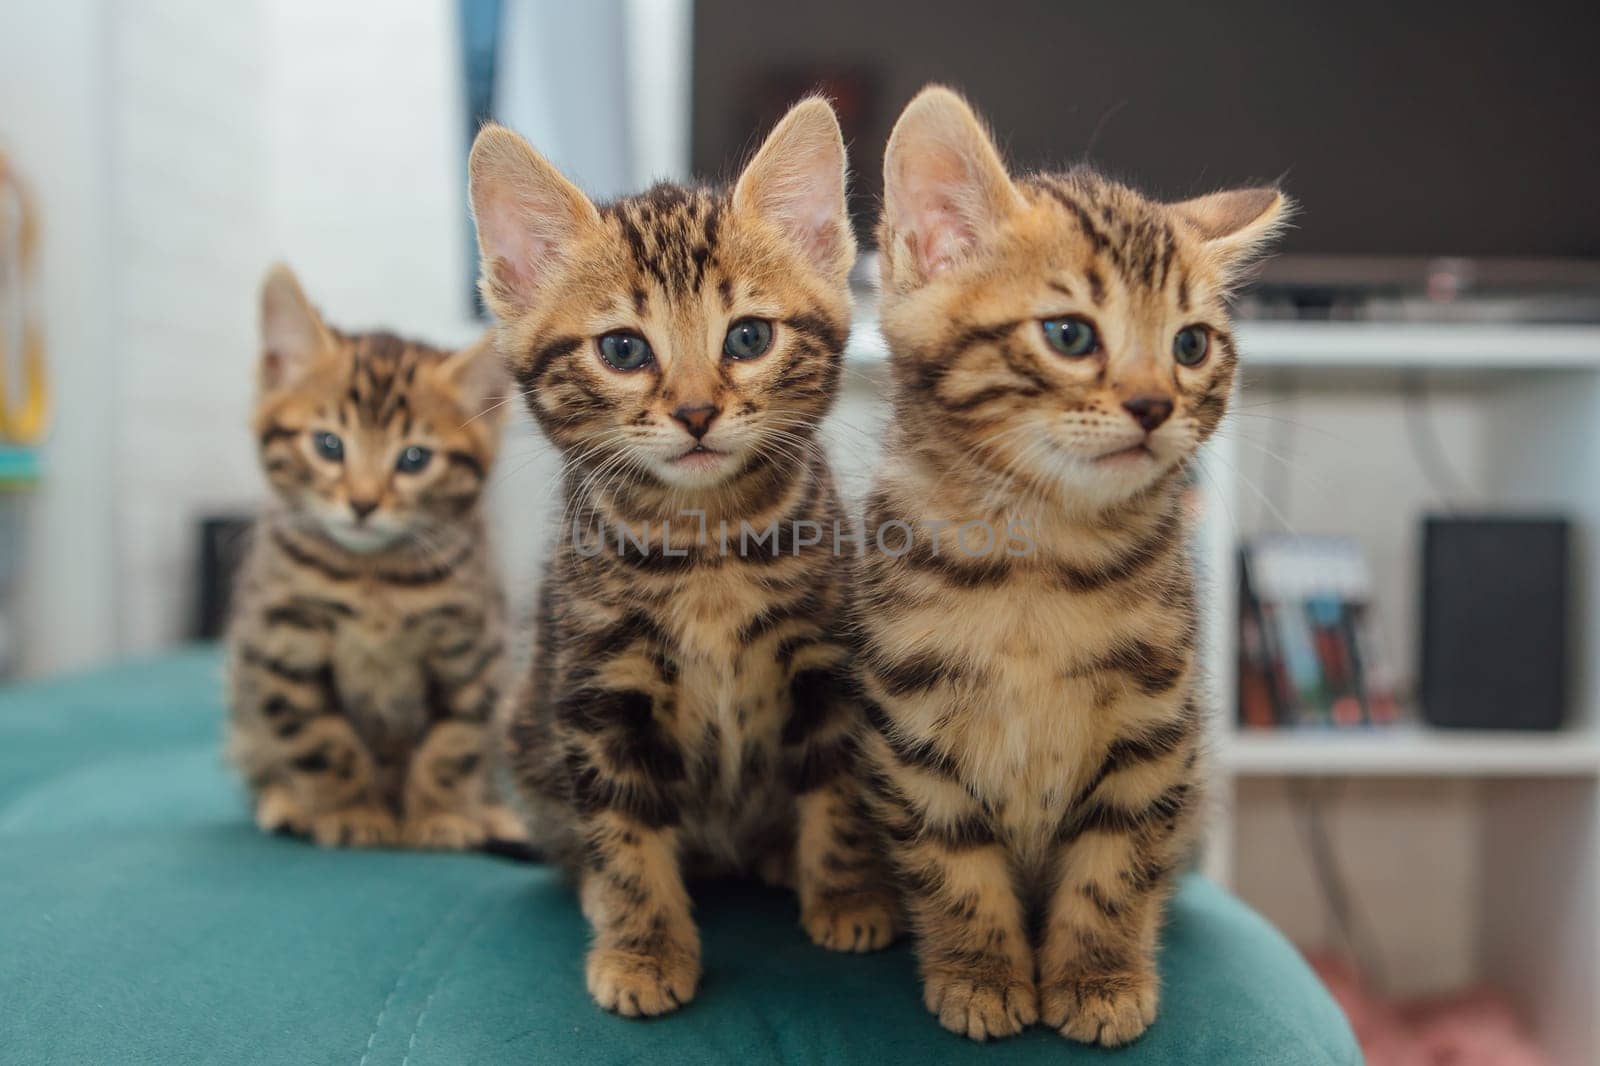 Bengal kittens sitting on the sofa in the house by Smile19